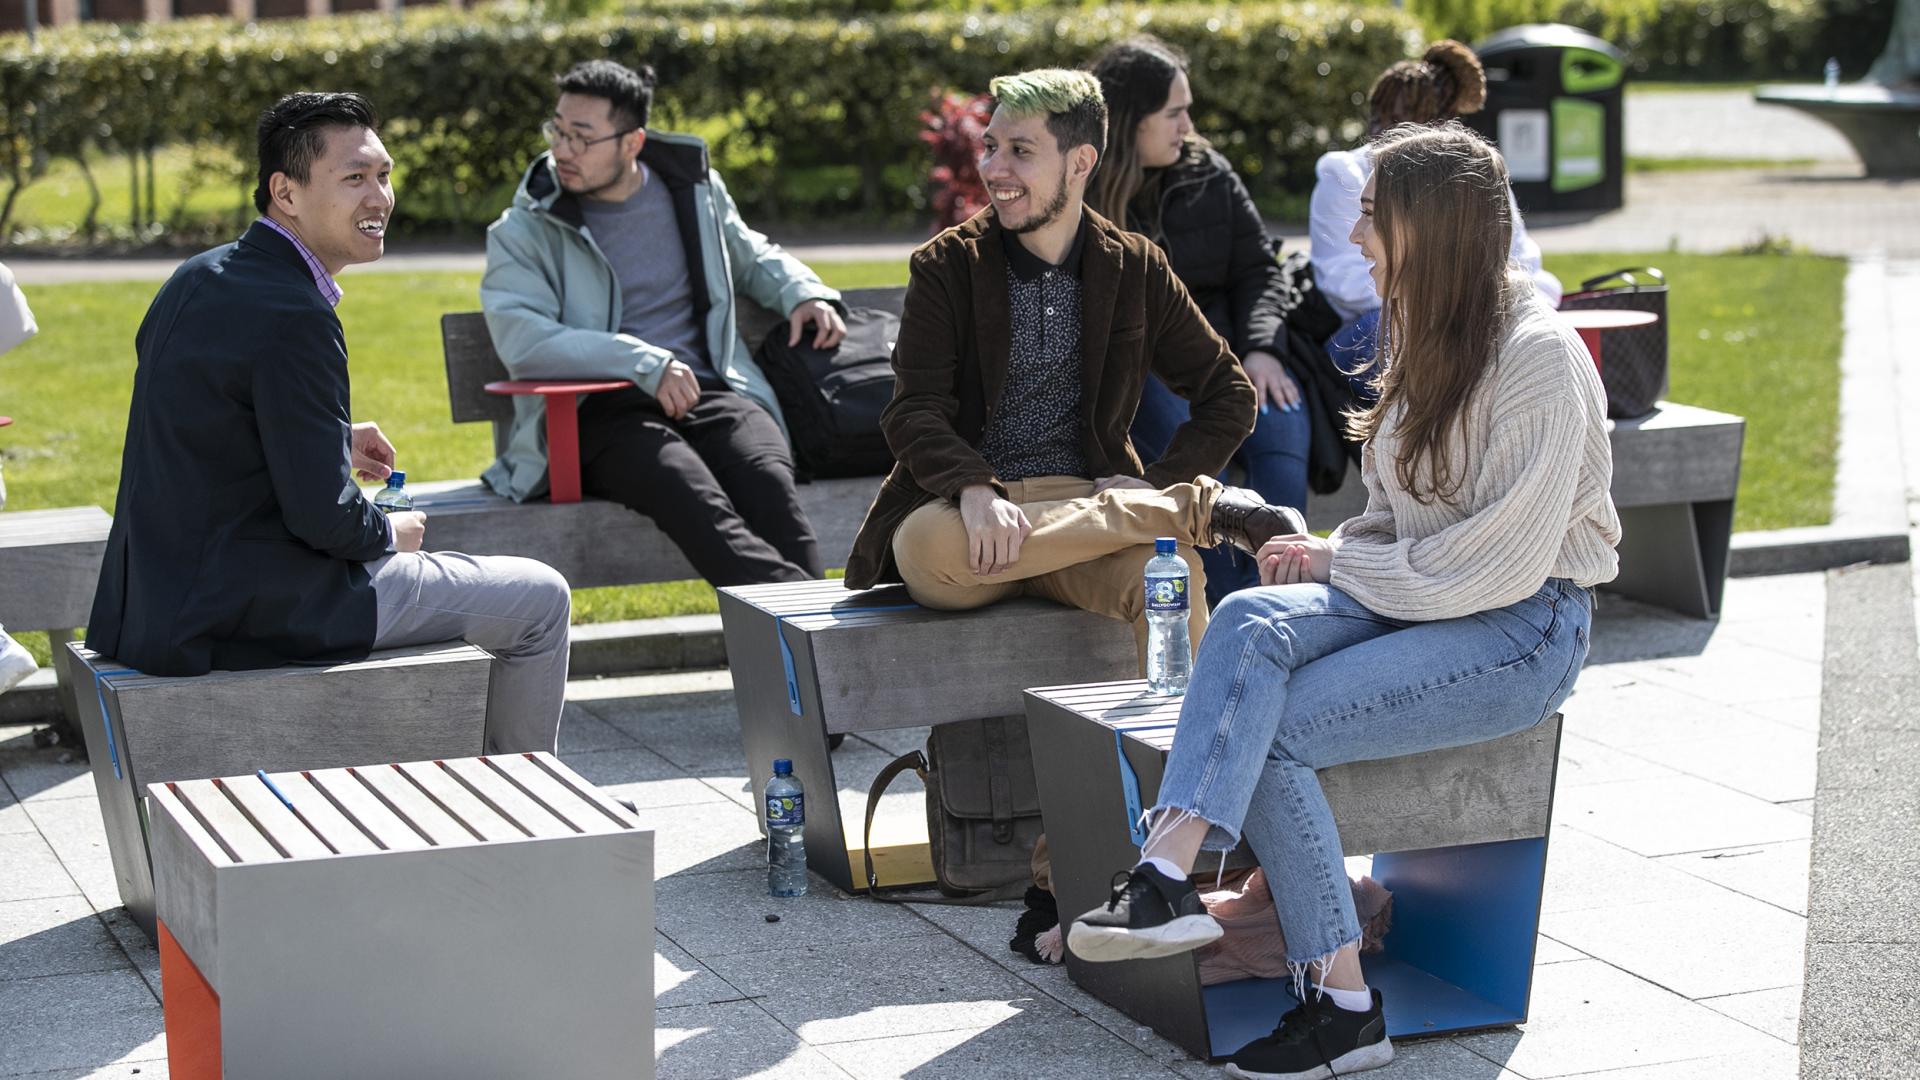 Shows group of international students on DCU campus